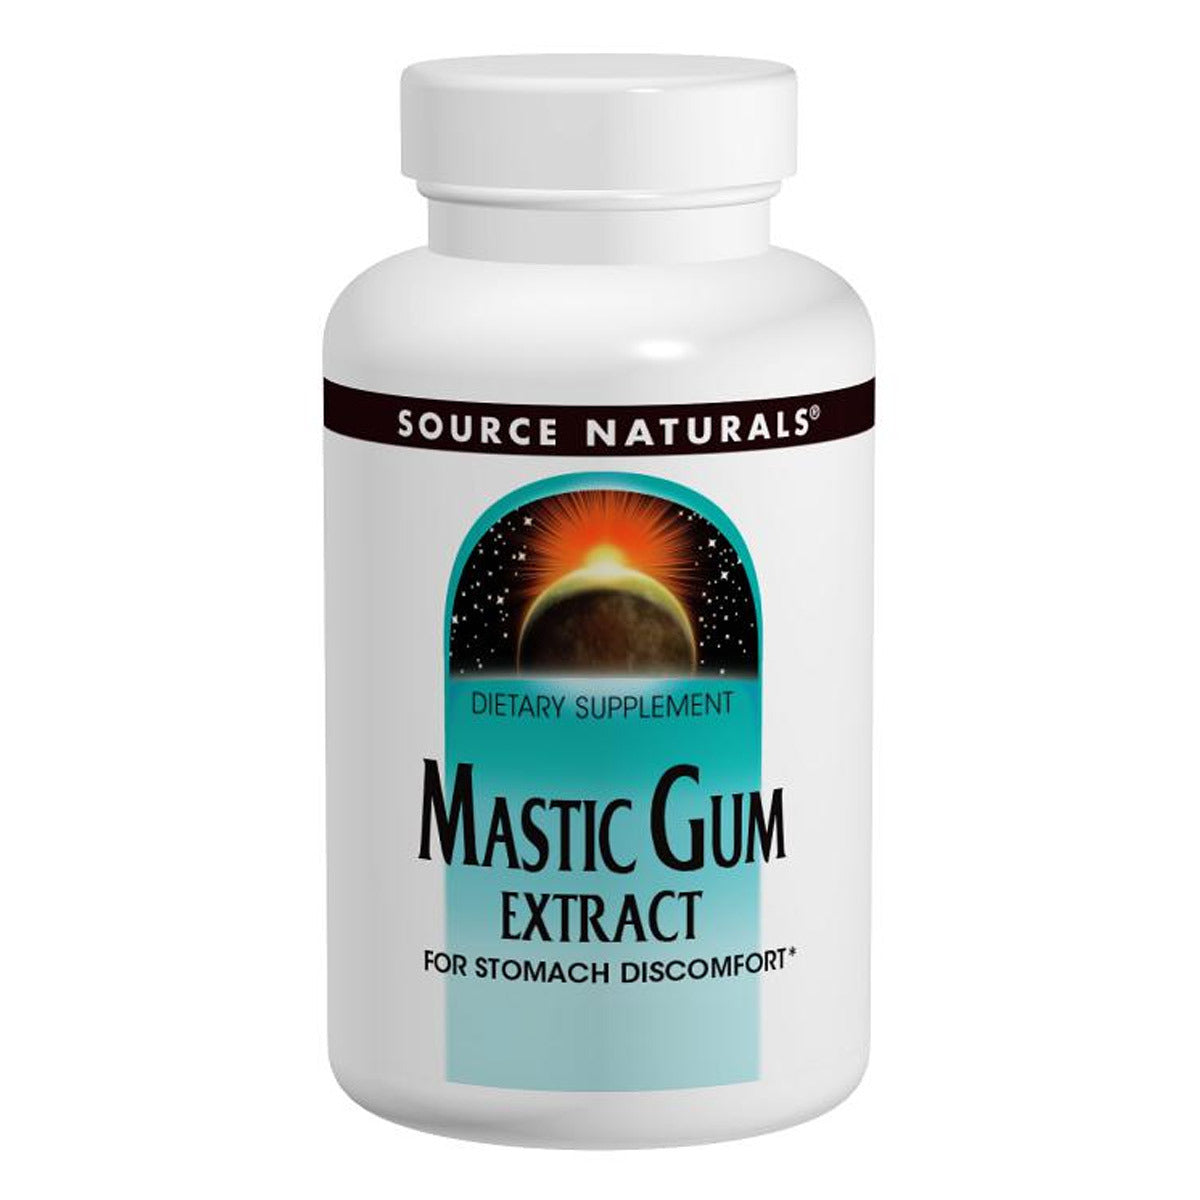 Source Naturals Mastic Gum Extract 500mg (30 count) – Smallflower